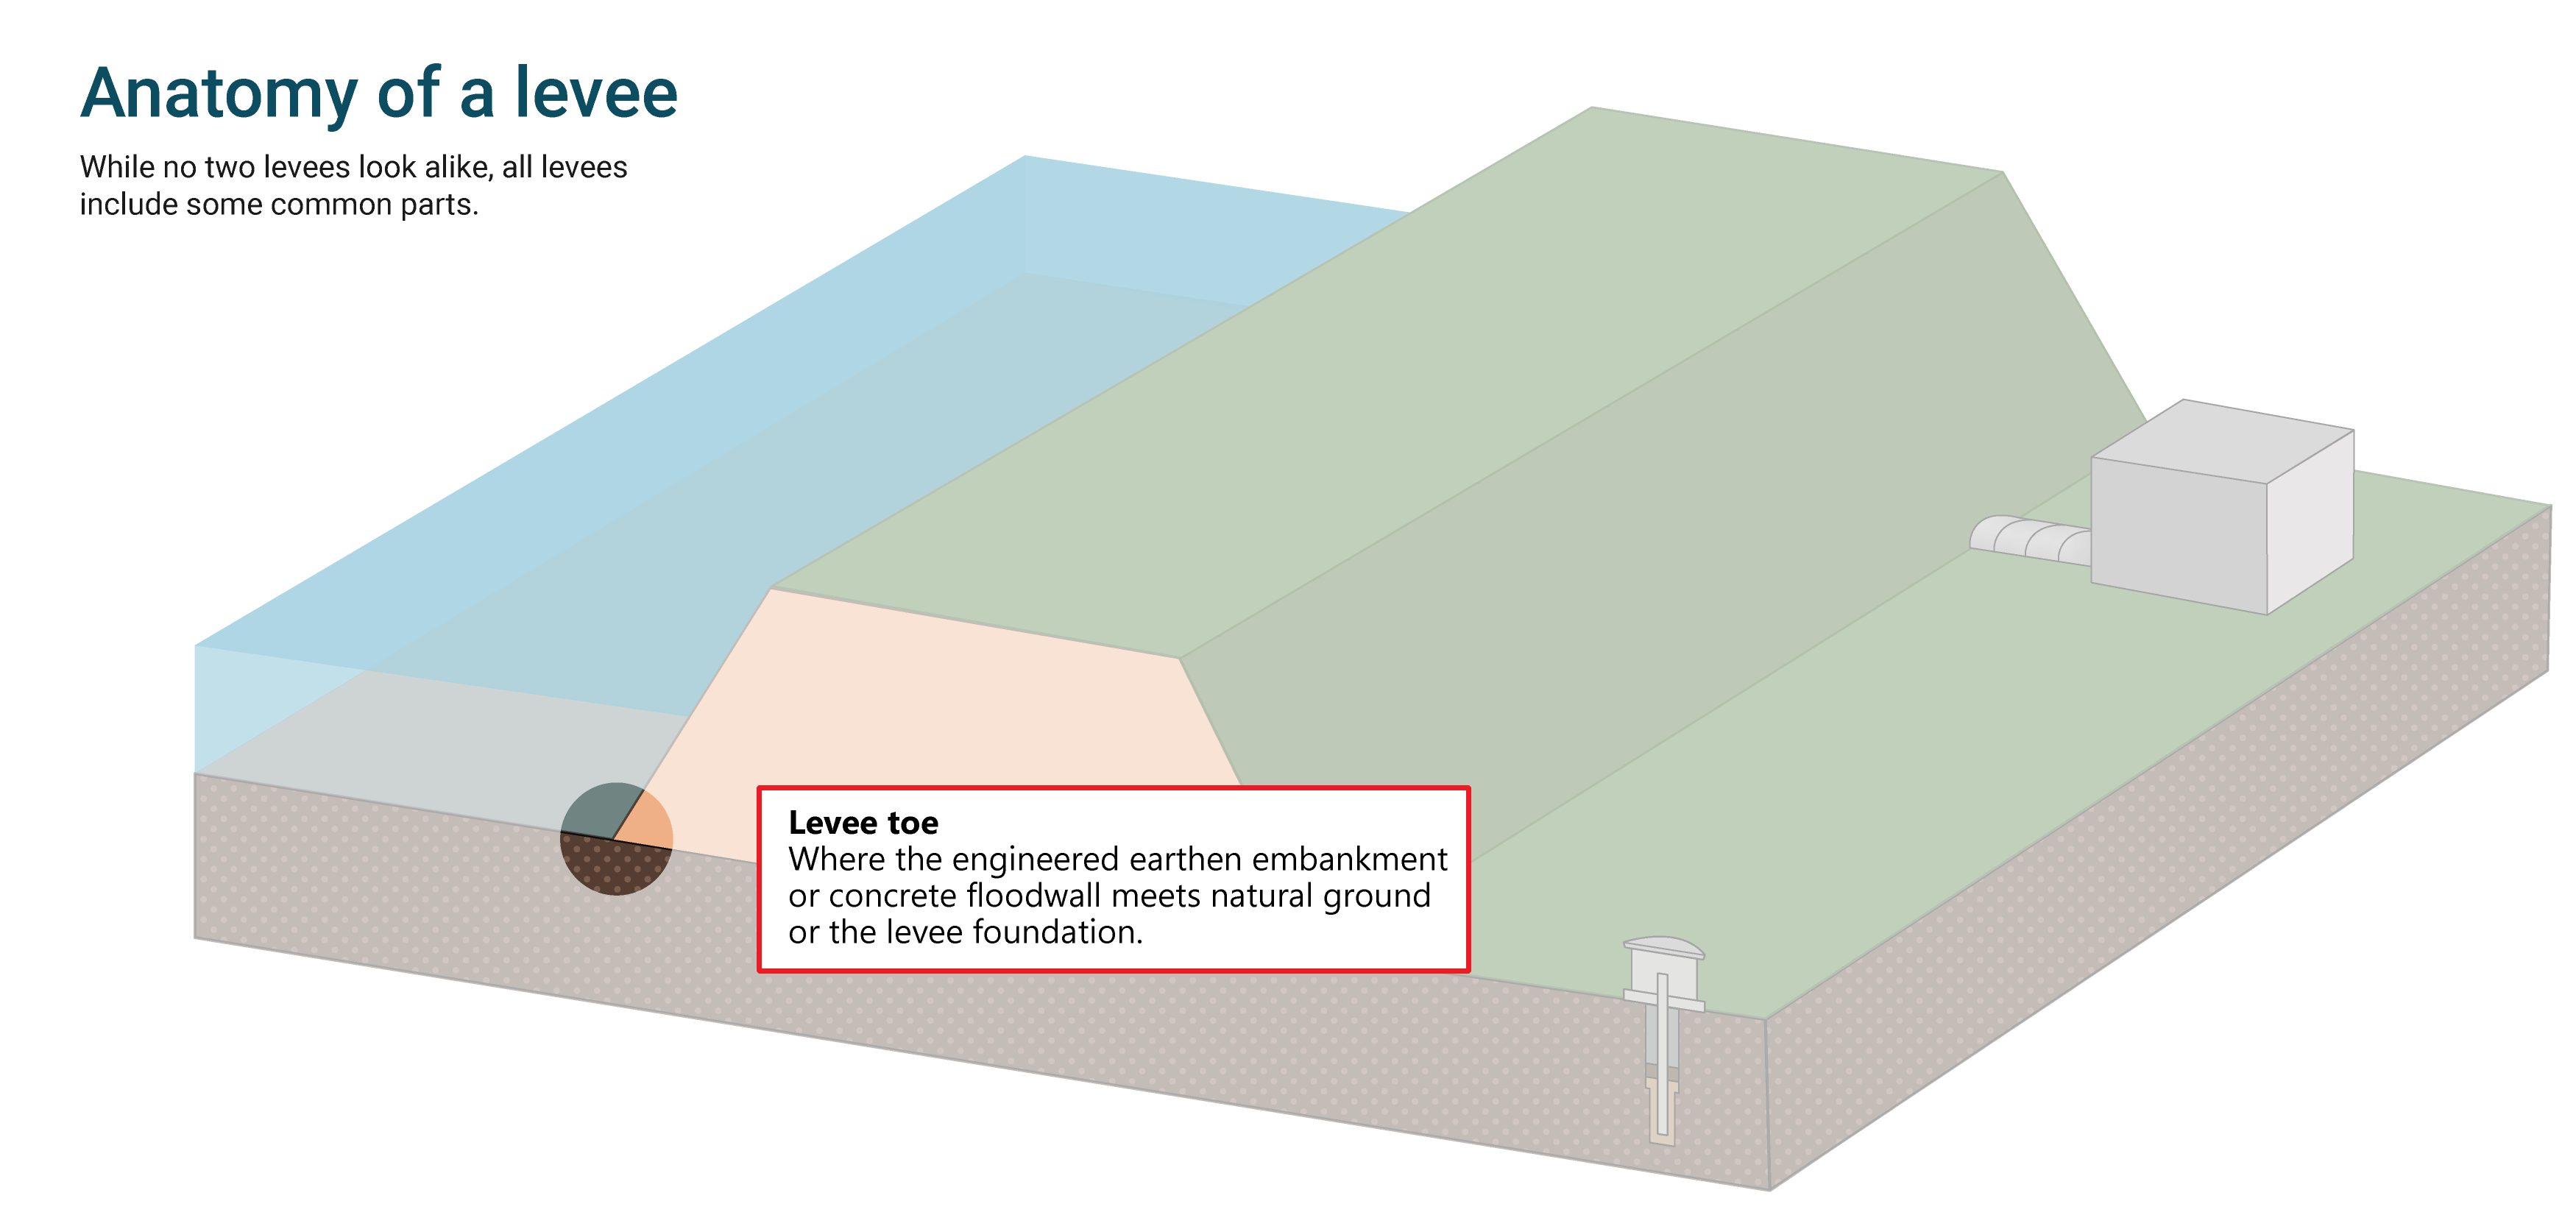 Diagram of a levee system's basic parts - Toe